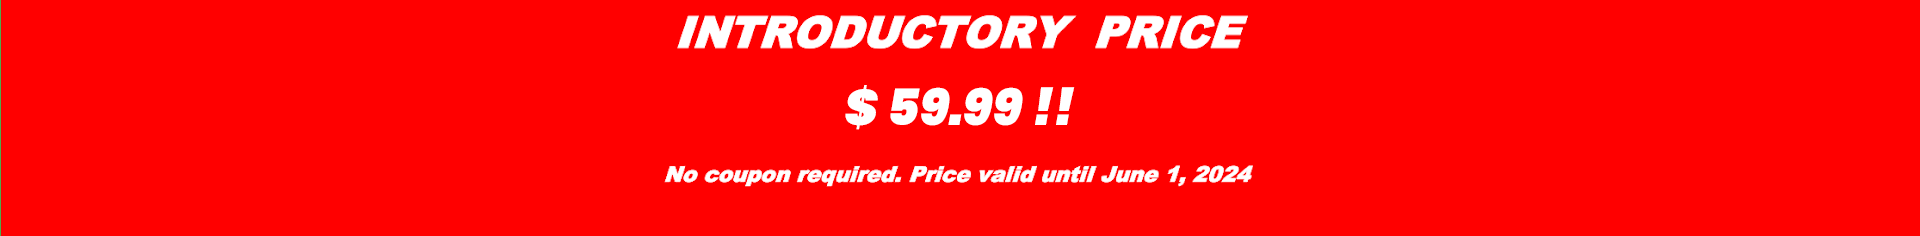 Introductory price